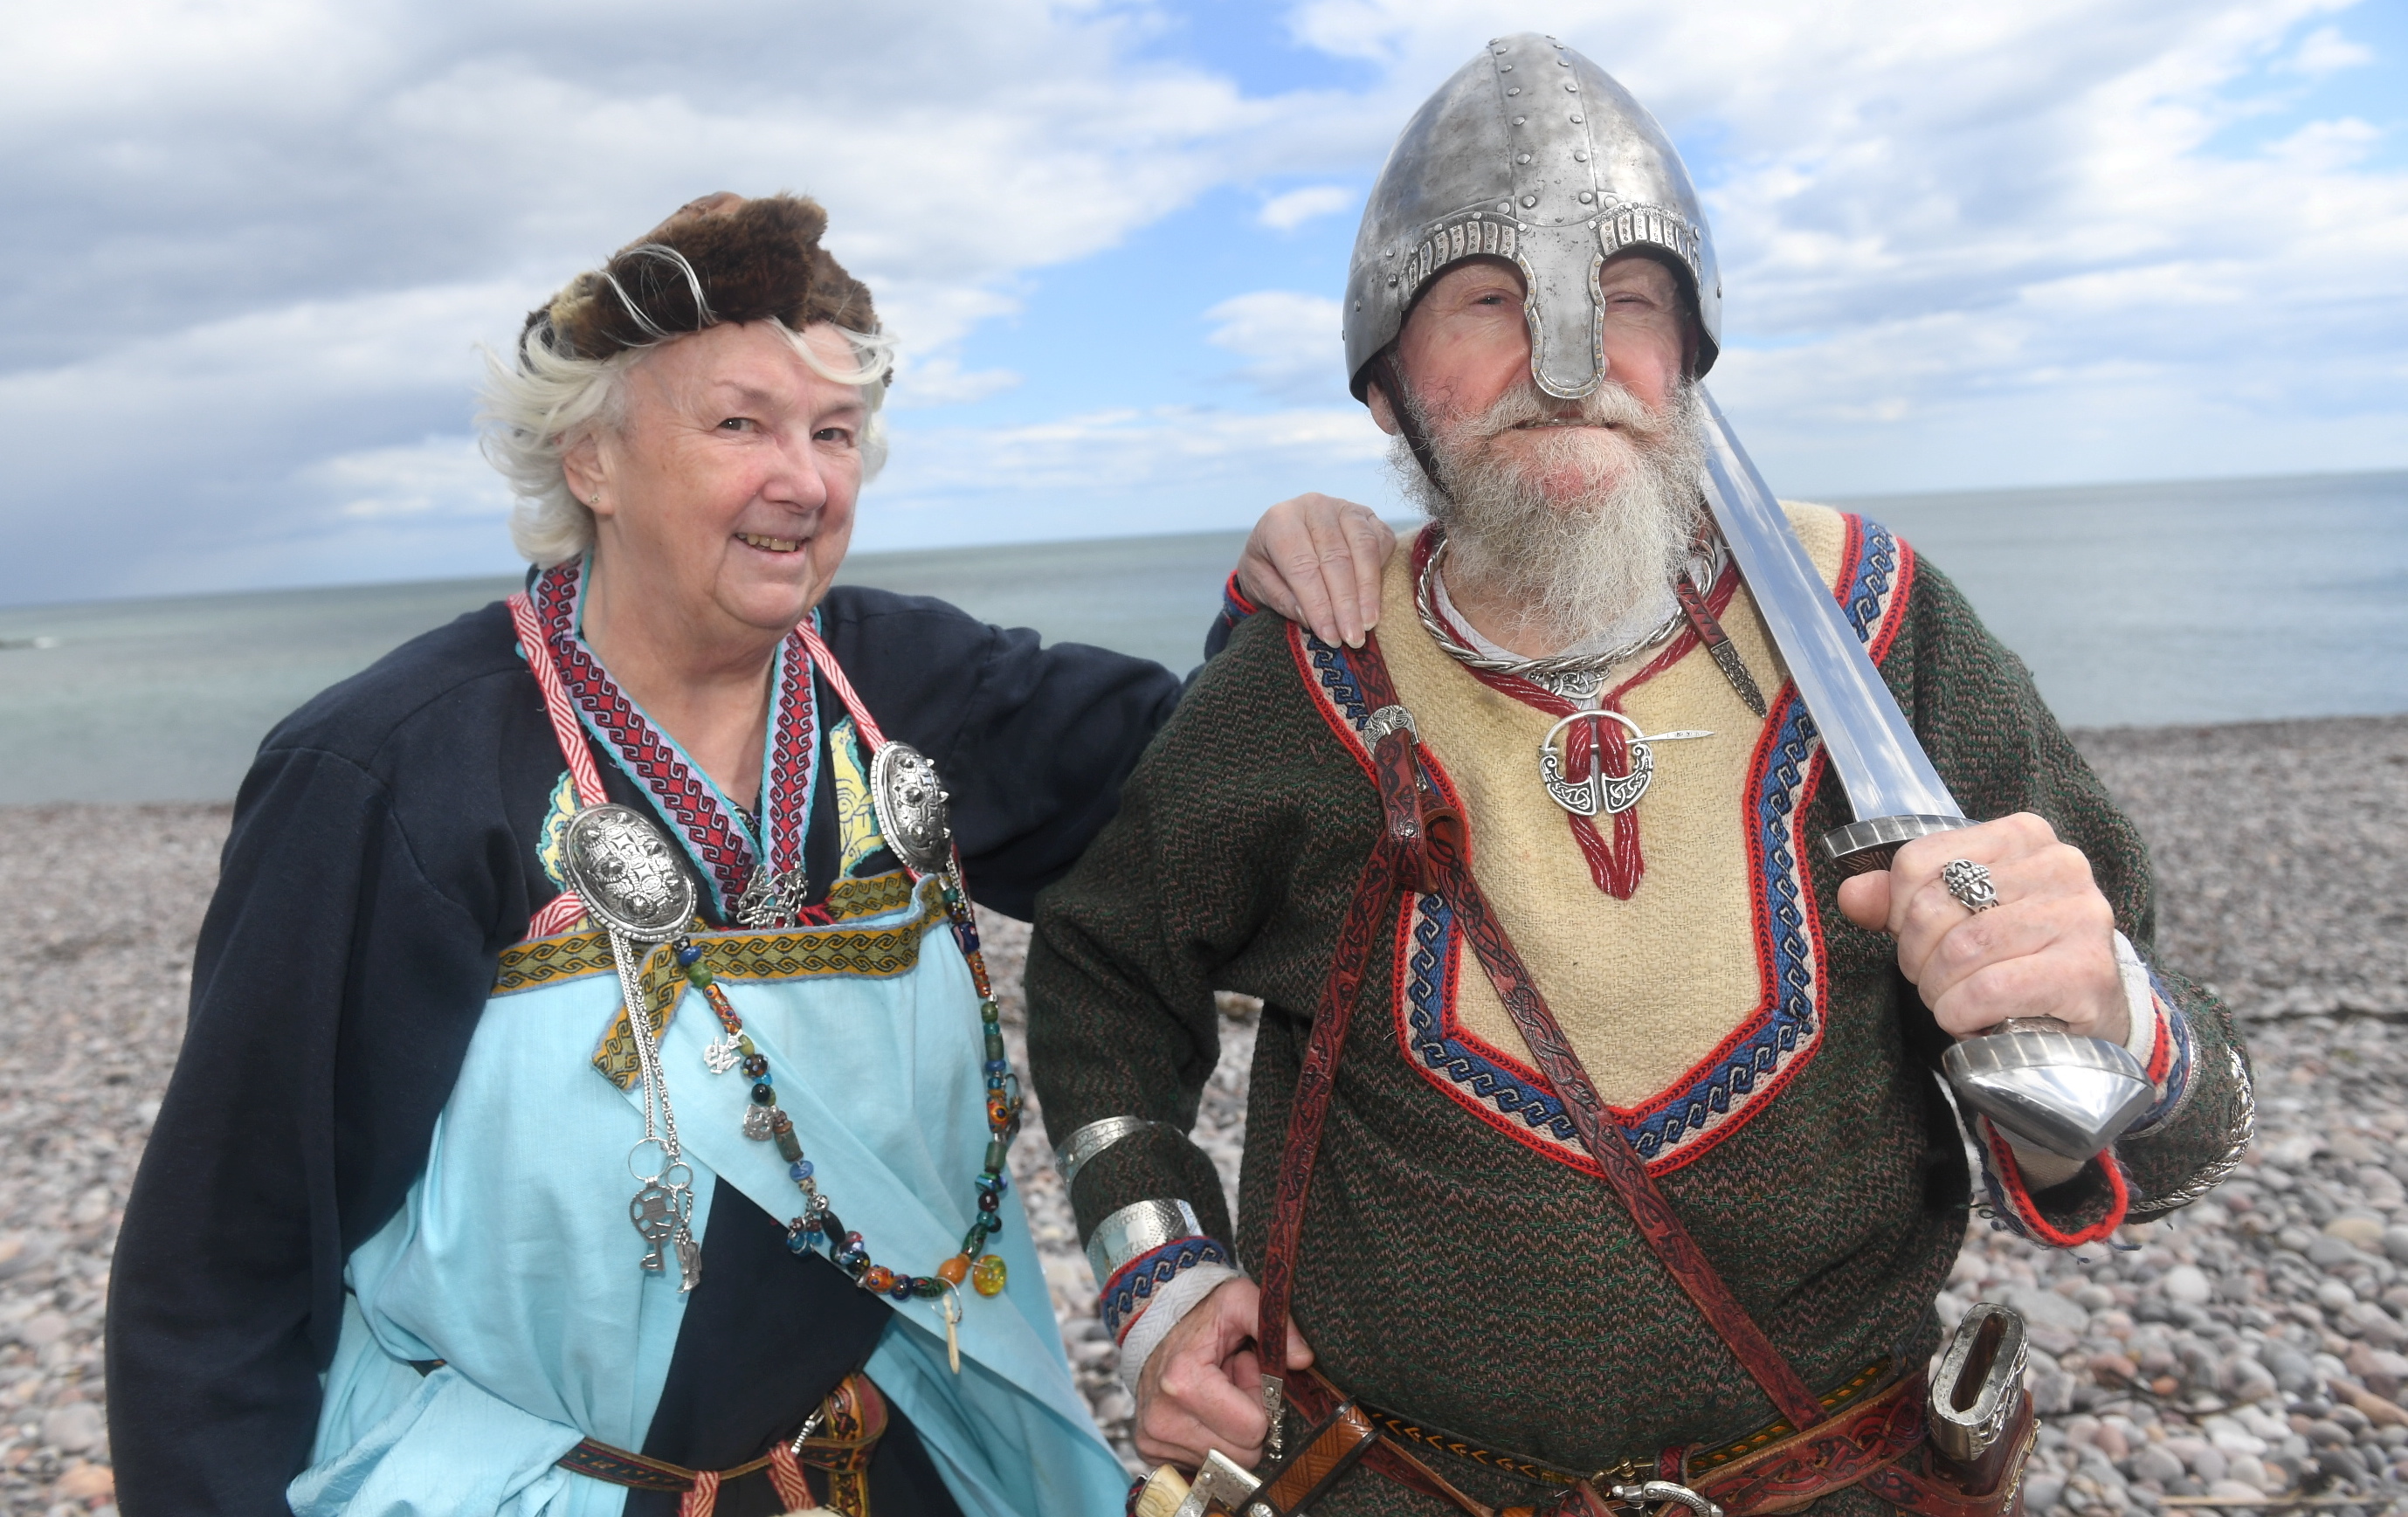 Sandie and Jim Gillbanks from Inverbervie are members of The Vikings re-enactment Society (Chris Sumner / Evening Express)